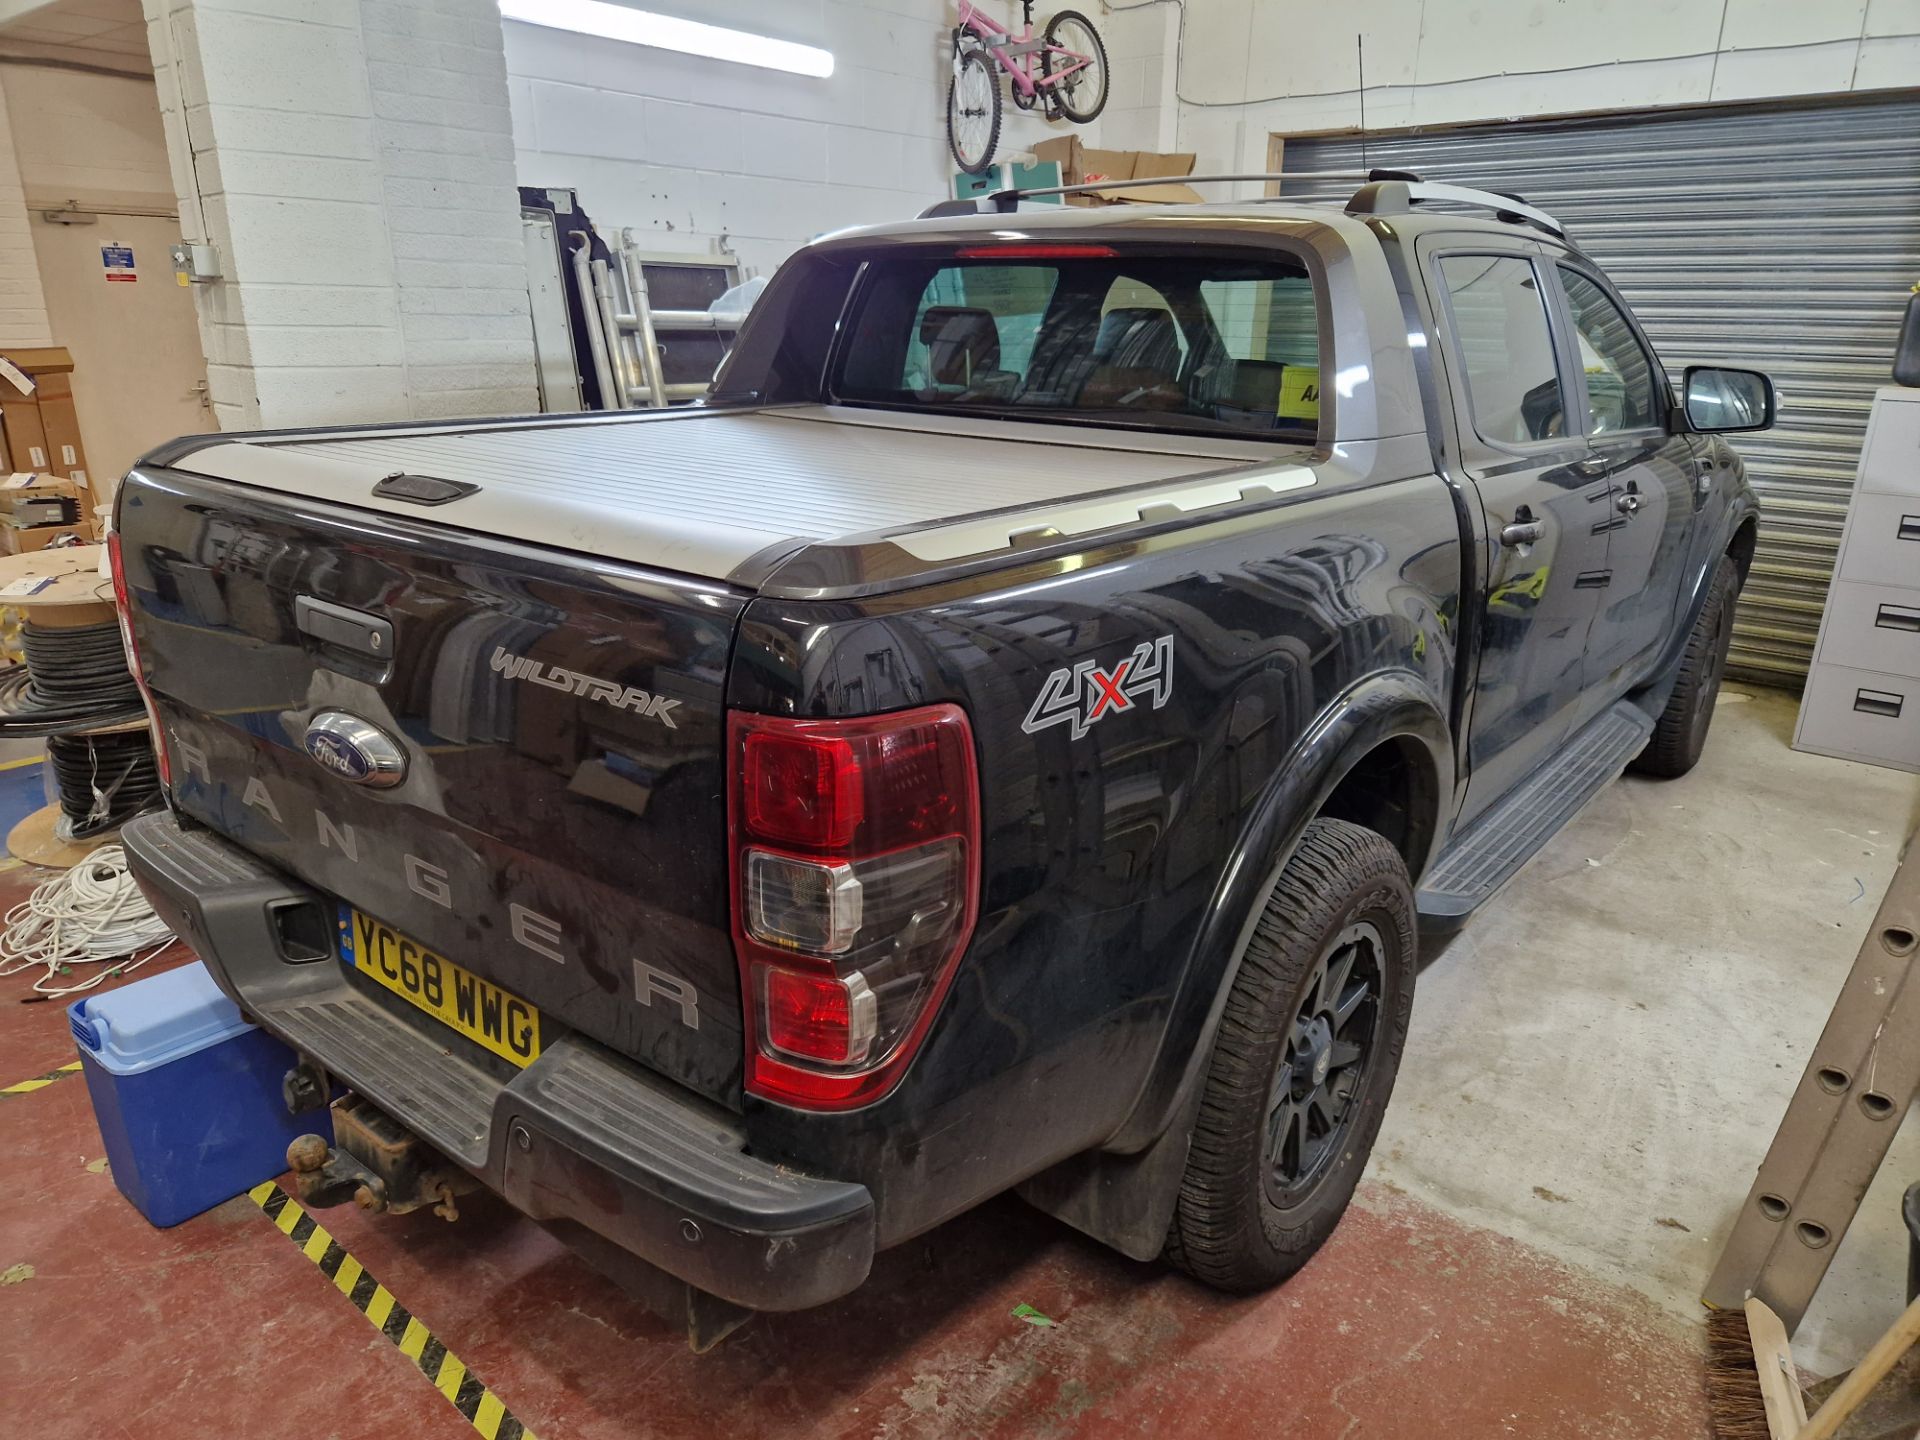 Ford Ranger Wildtrak 3.2 TDCi 200 Auto Diesel Double Cab Pick Up, registration no. YC68 WWG, date - Image 4 of 10